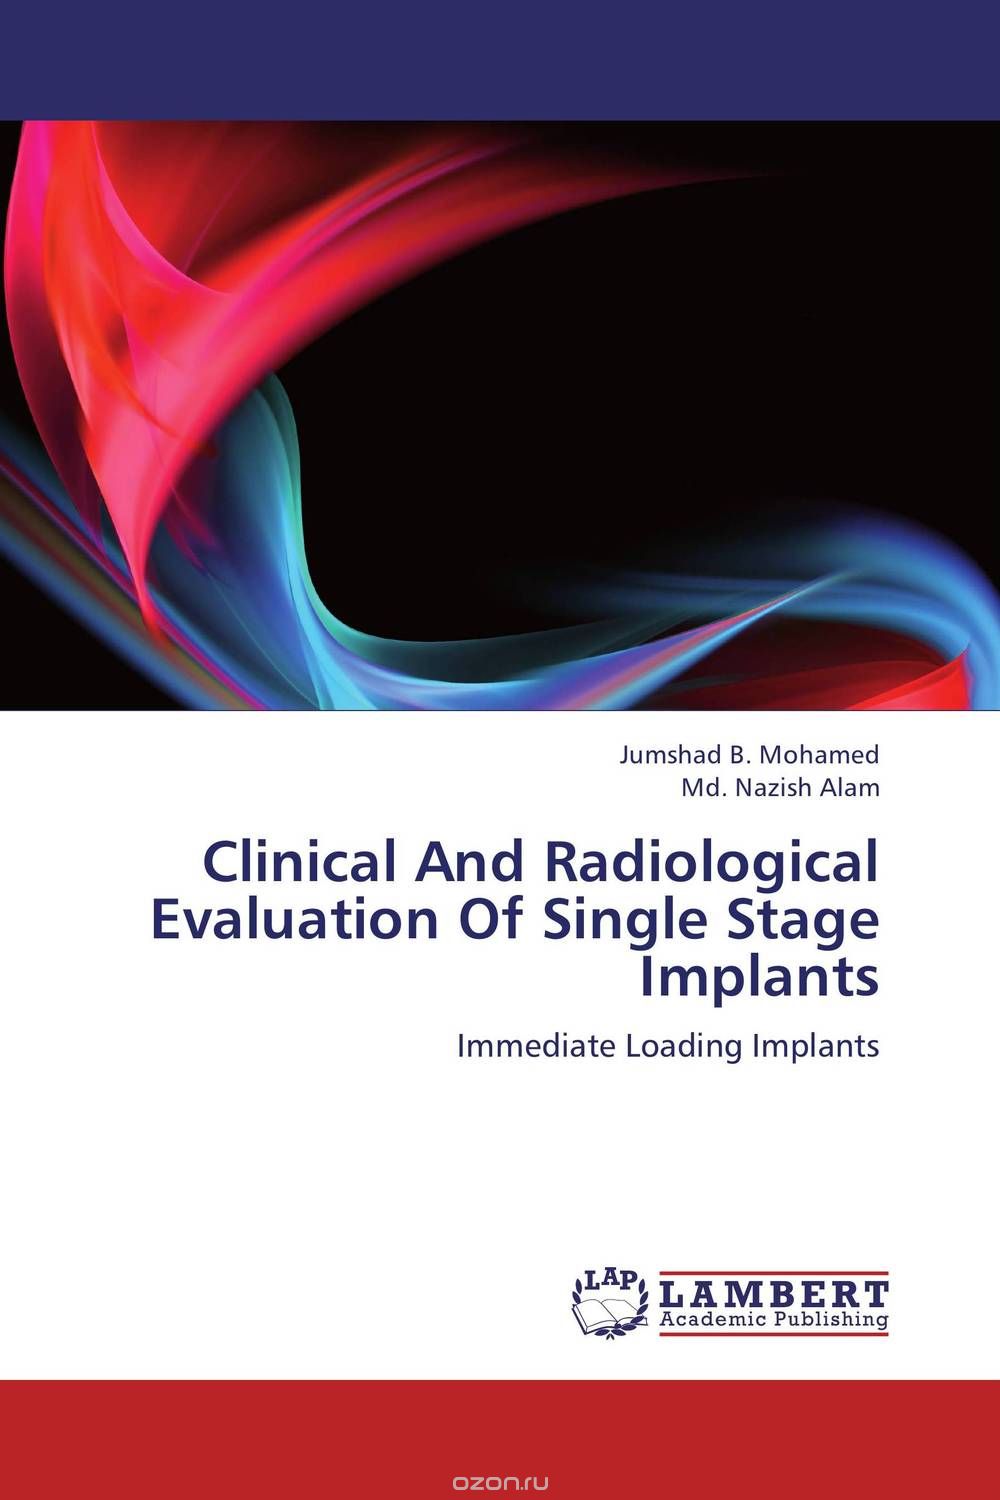 Скачать книгу "Clinical And Radiological Evaluation Of Single Stage Implants"